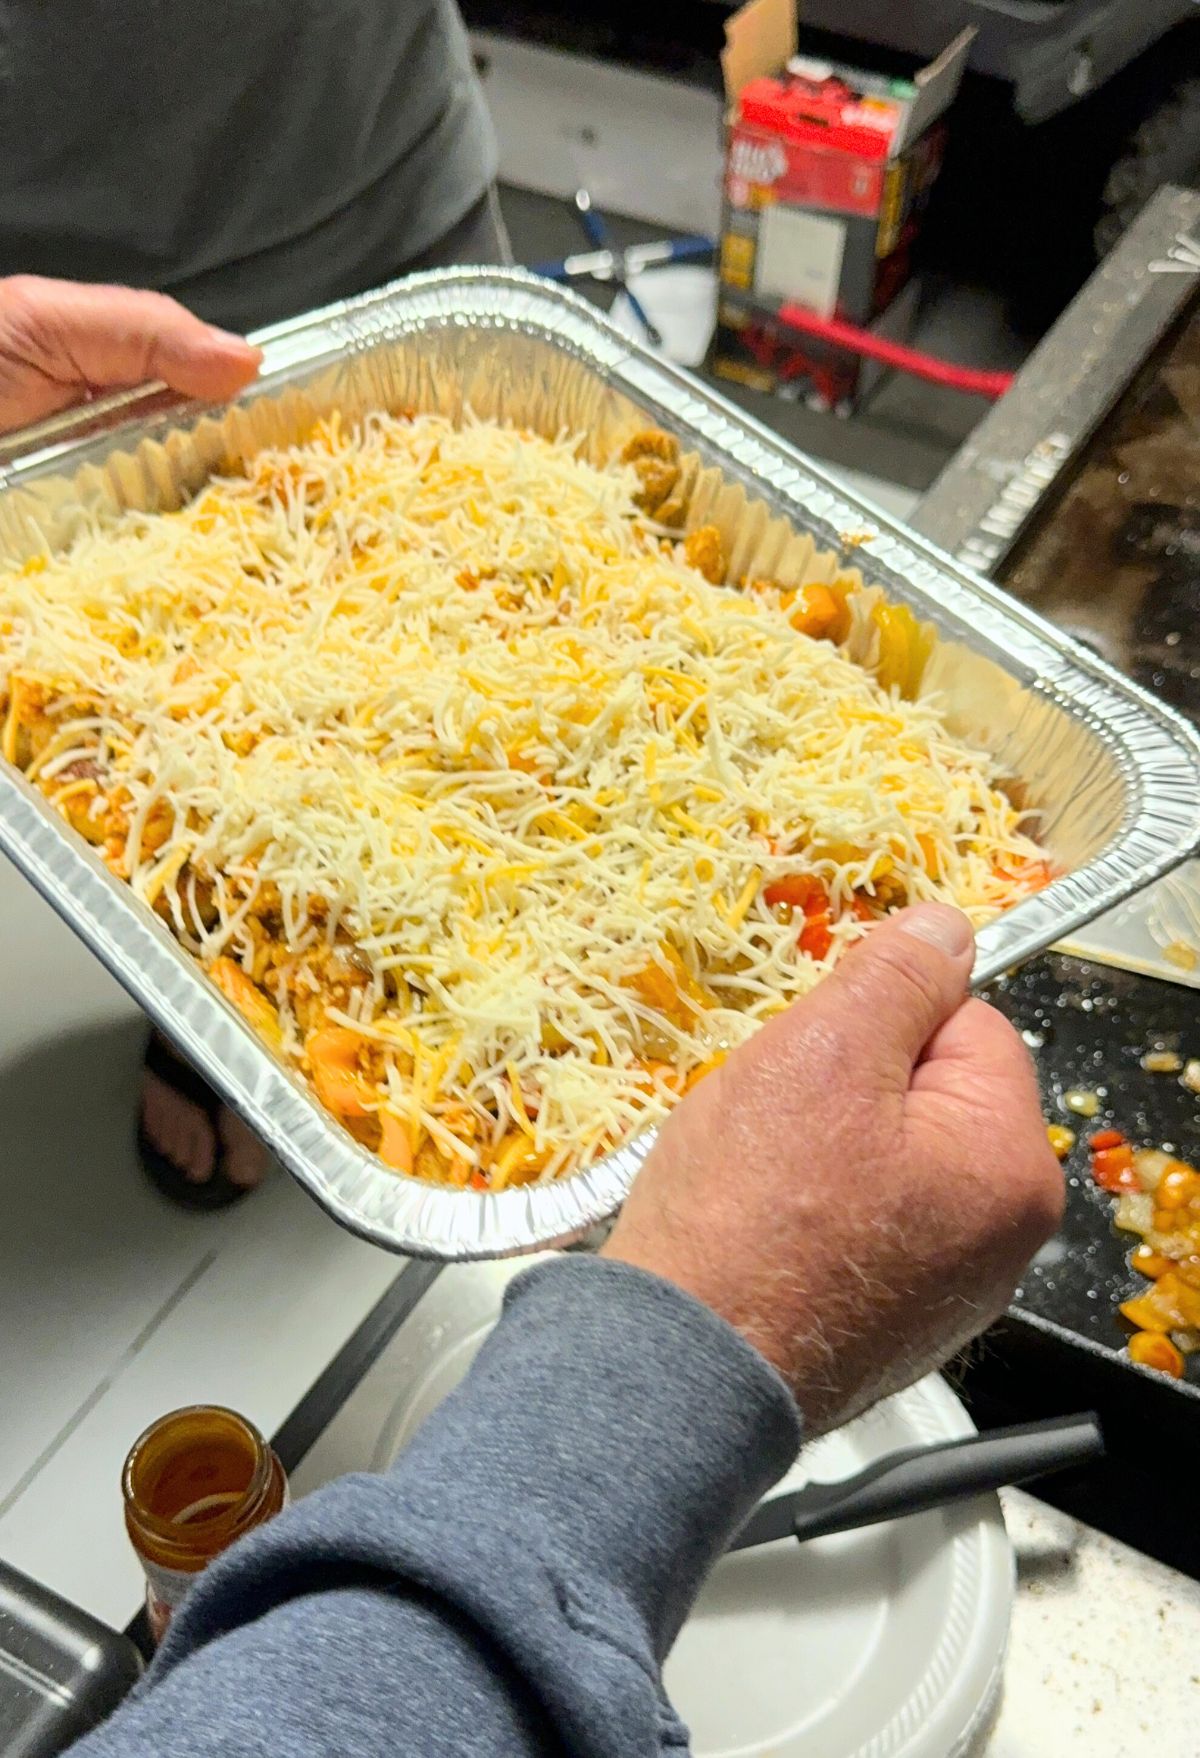 A person holding a tray of pasta topped with shredded cheese, ready to be baked.